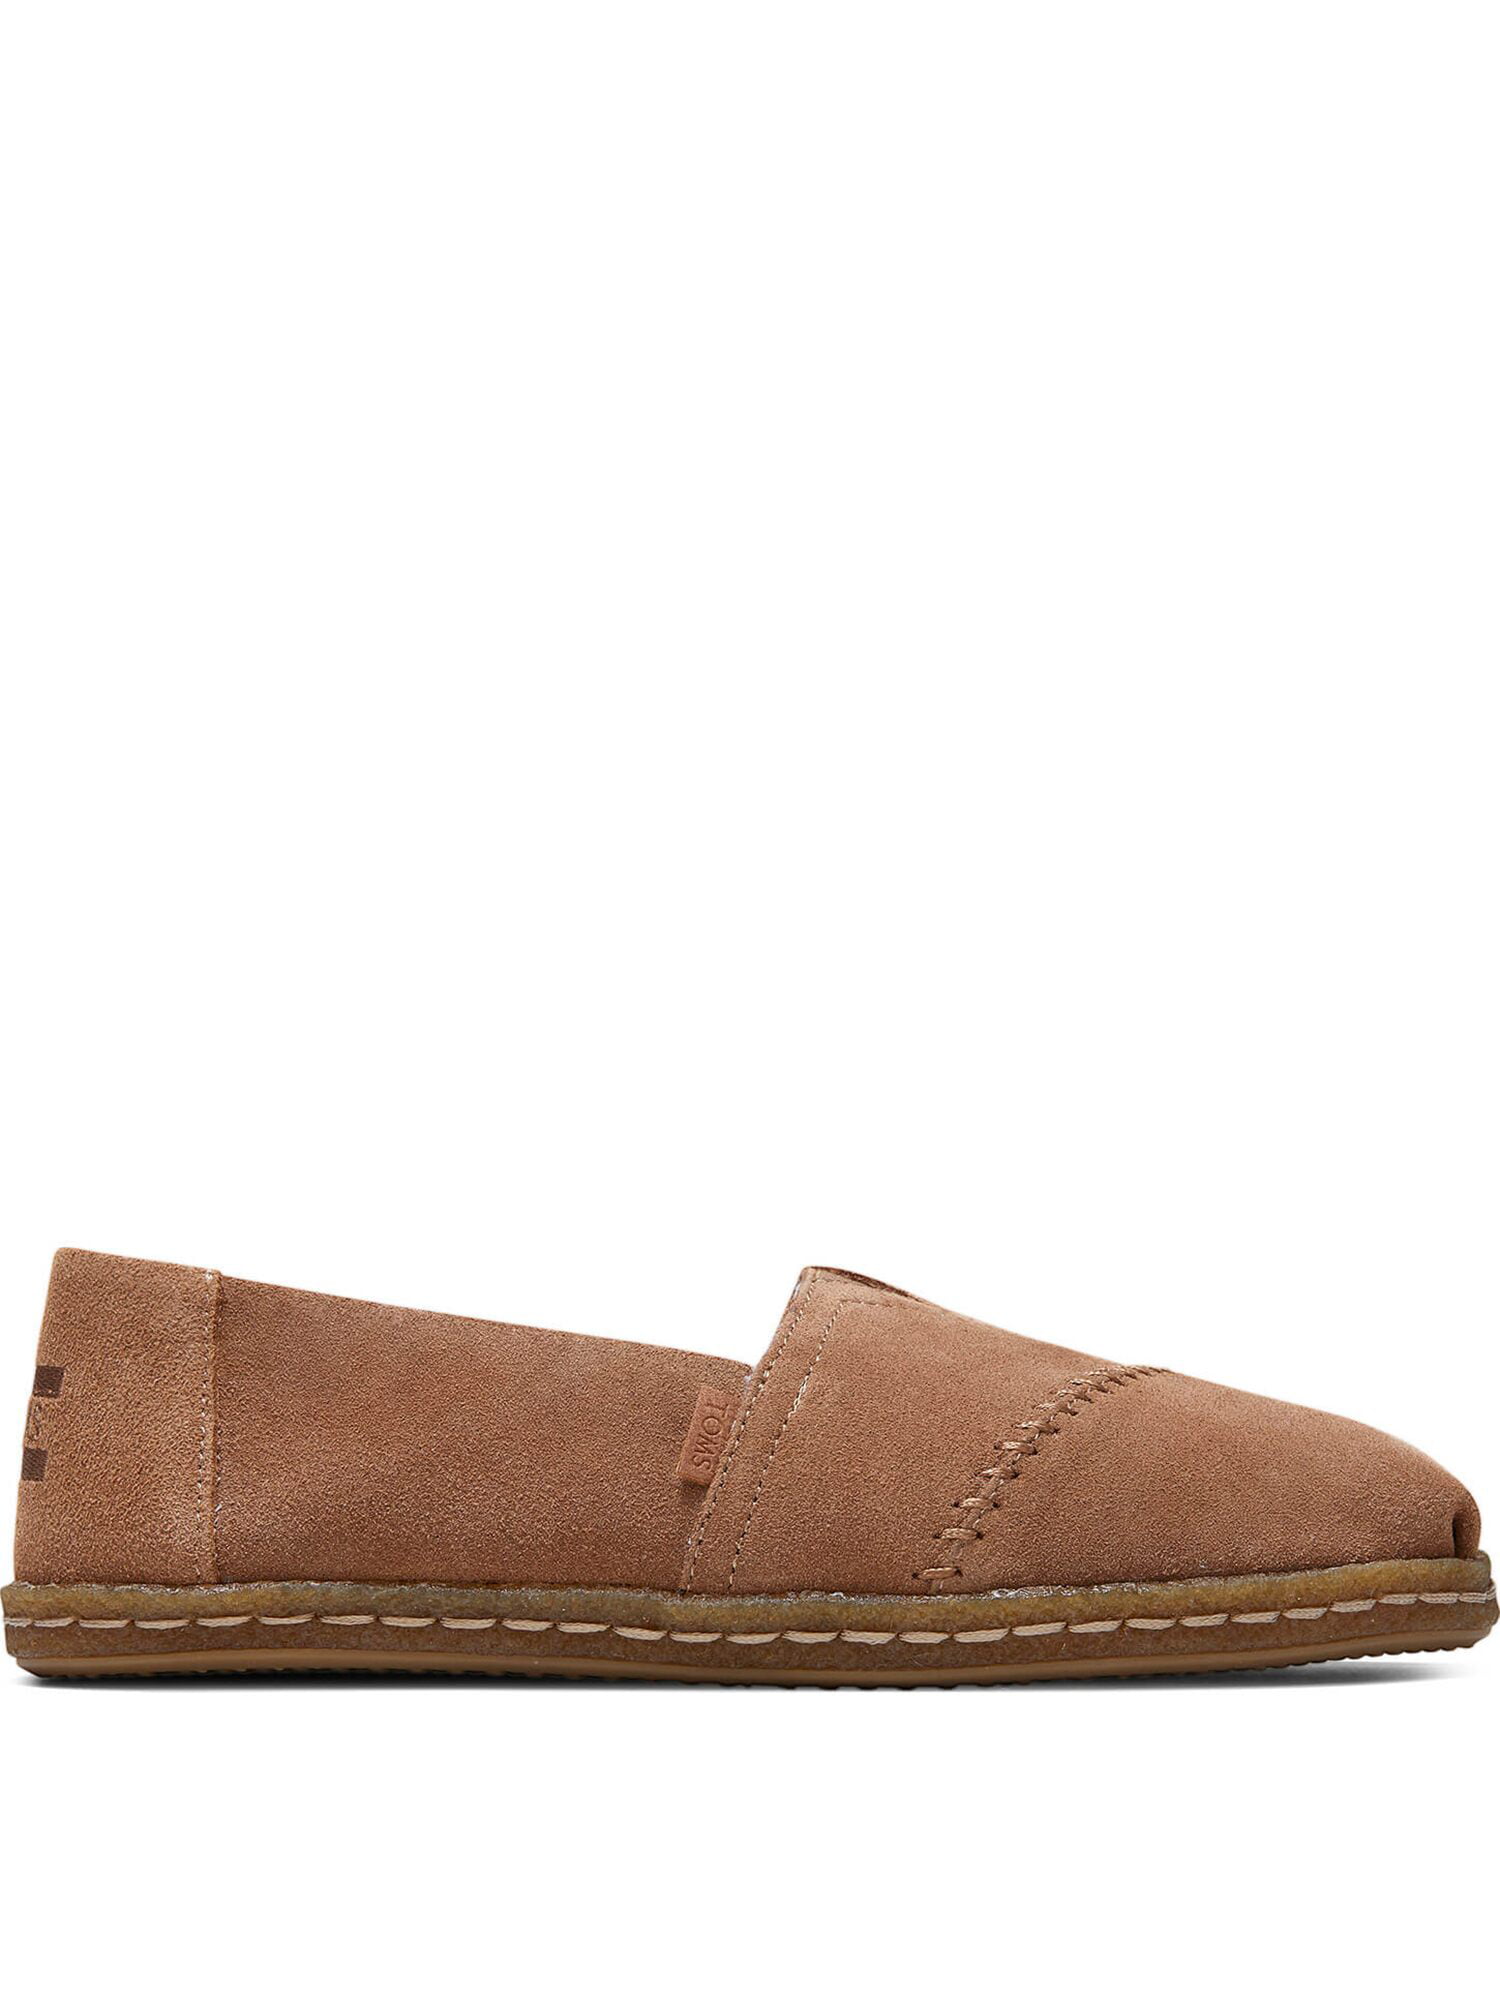 toffee suede crepe women's classics